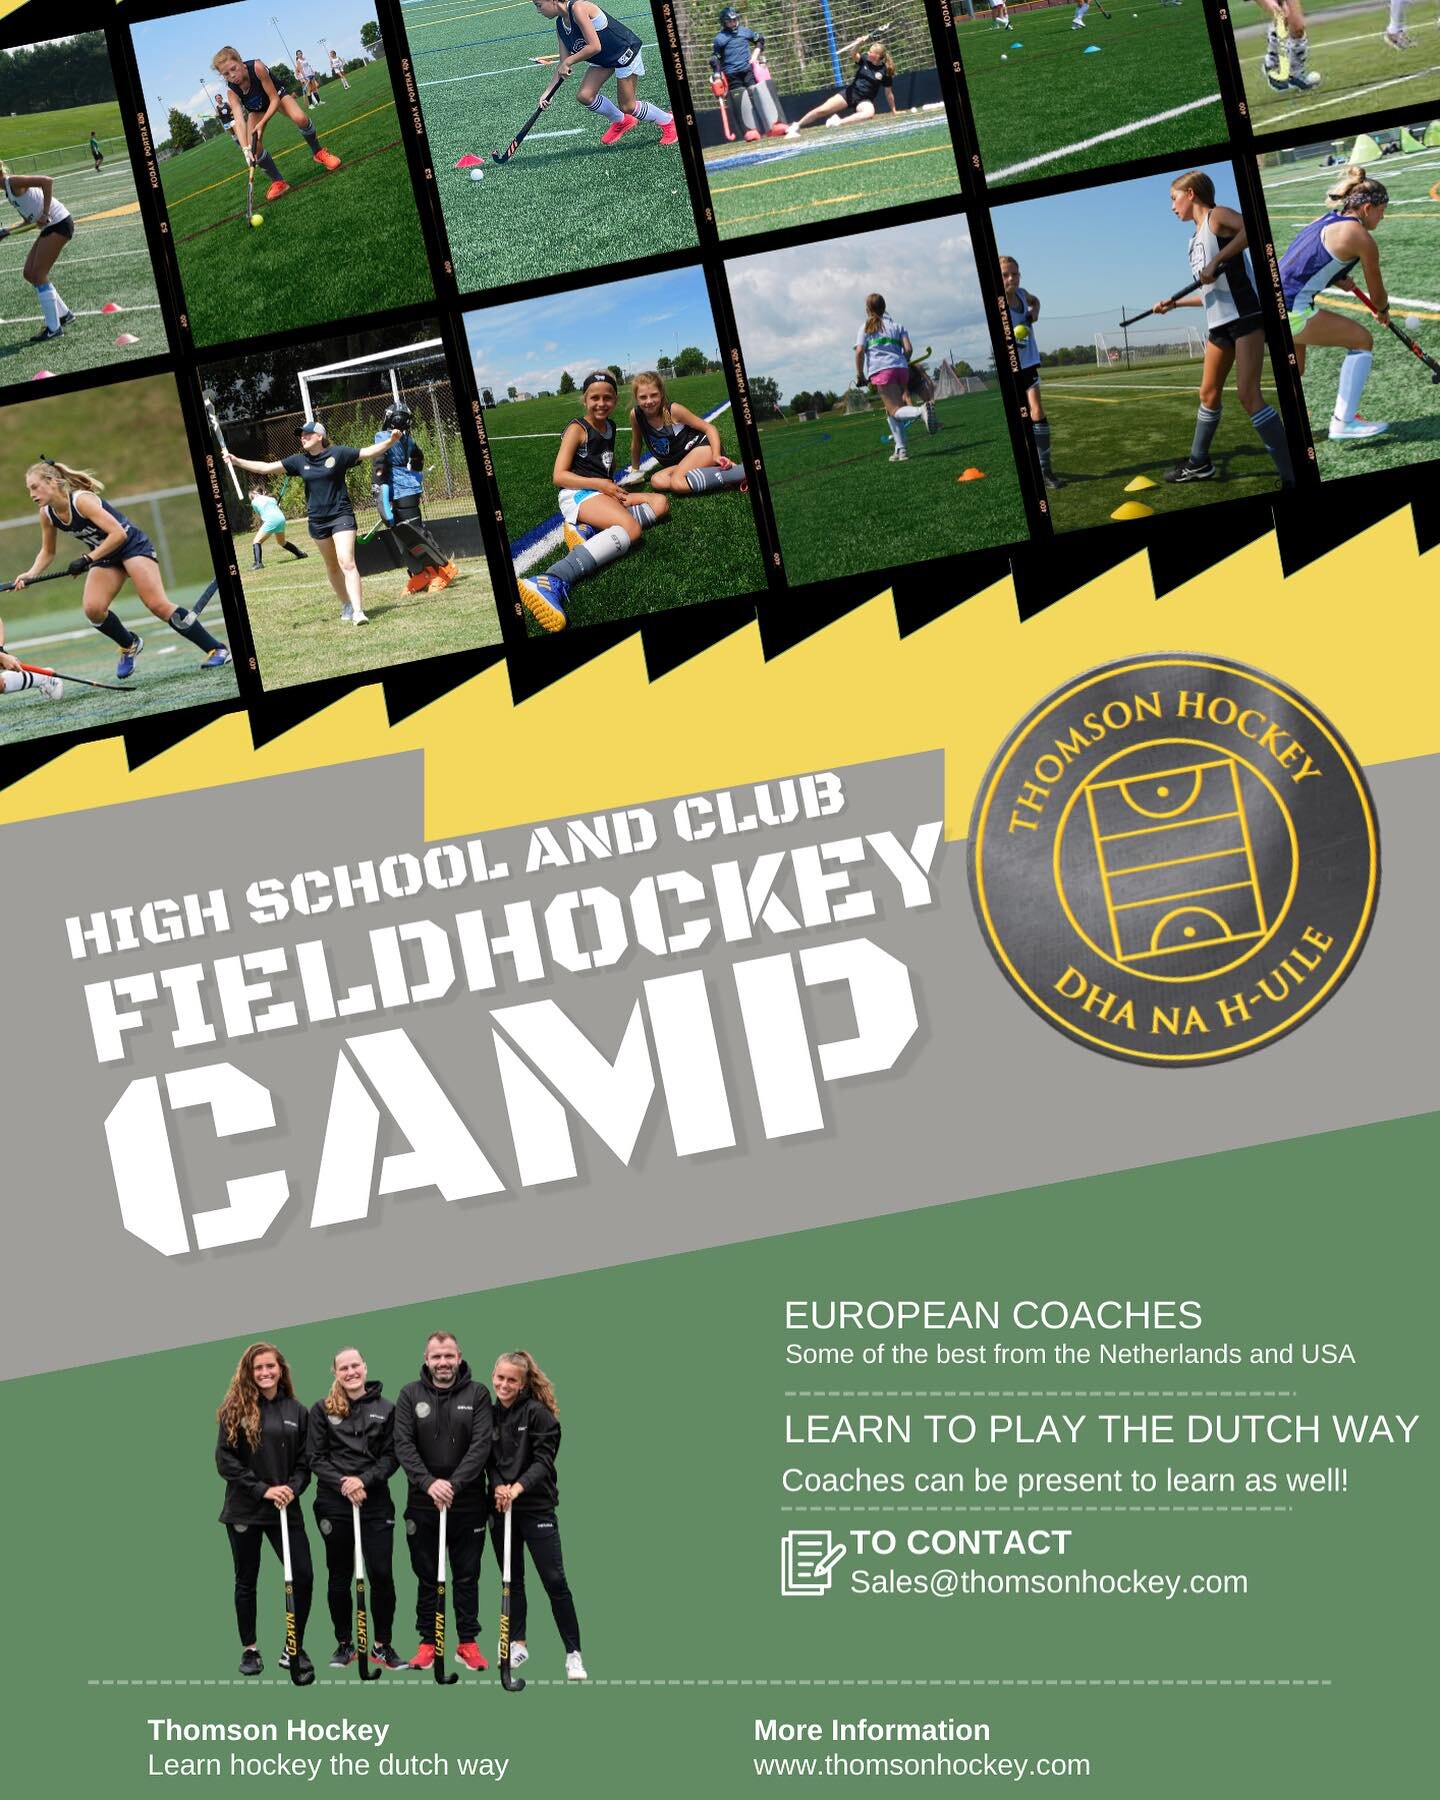 🚨 WHAT AN OPPORTUNITY 🚨 

Thomson hockey is back in the USA this summer to run private and open camps at various high schools and clubs, there is still
Space in the schedule for 2 more private camps. 

These private camps are exclusively for a club